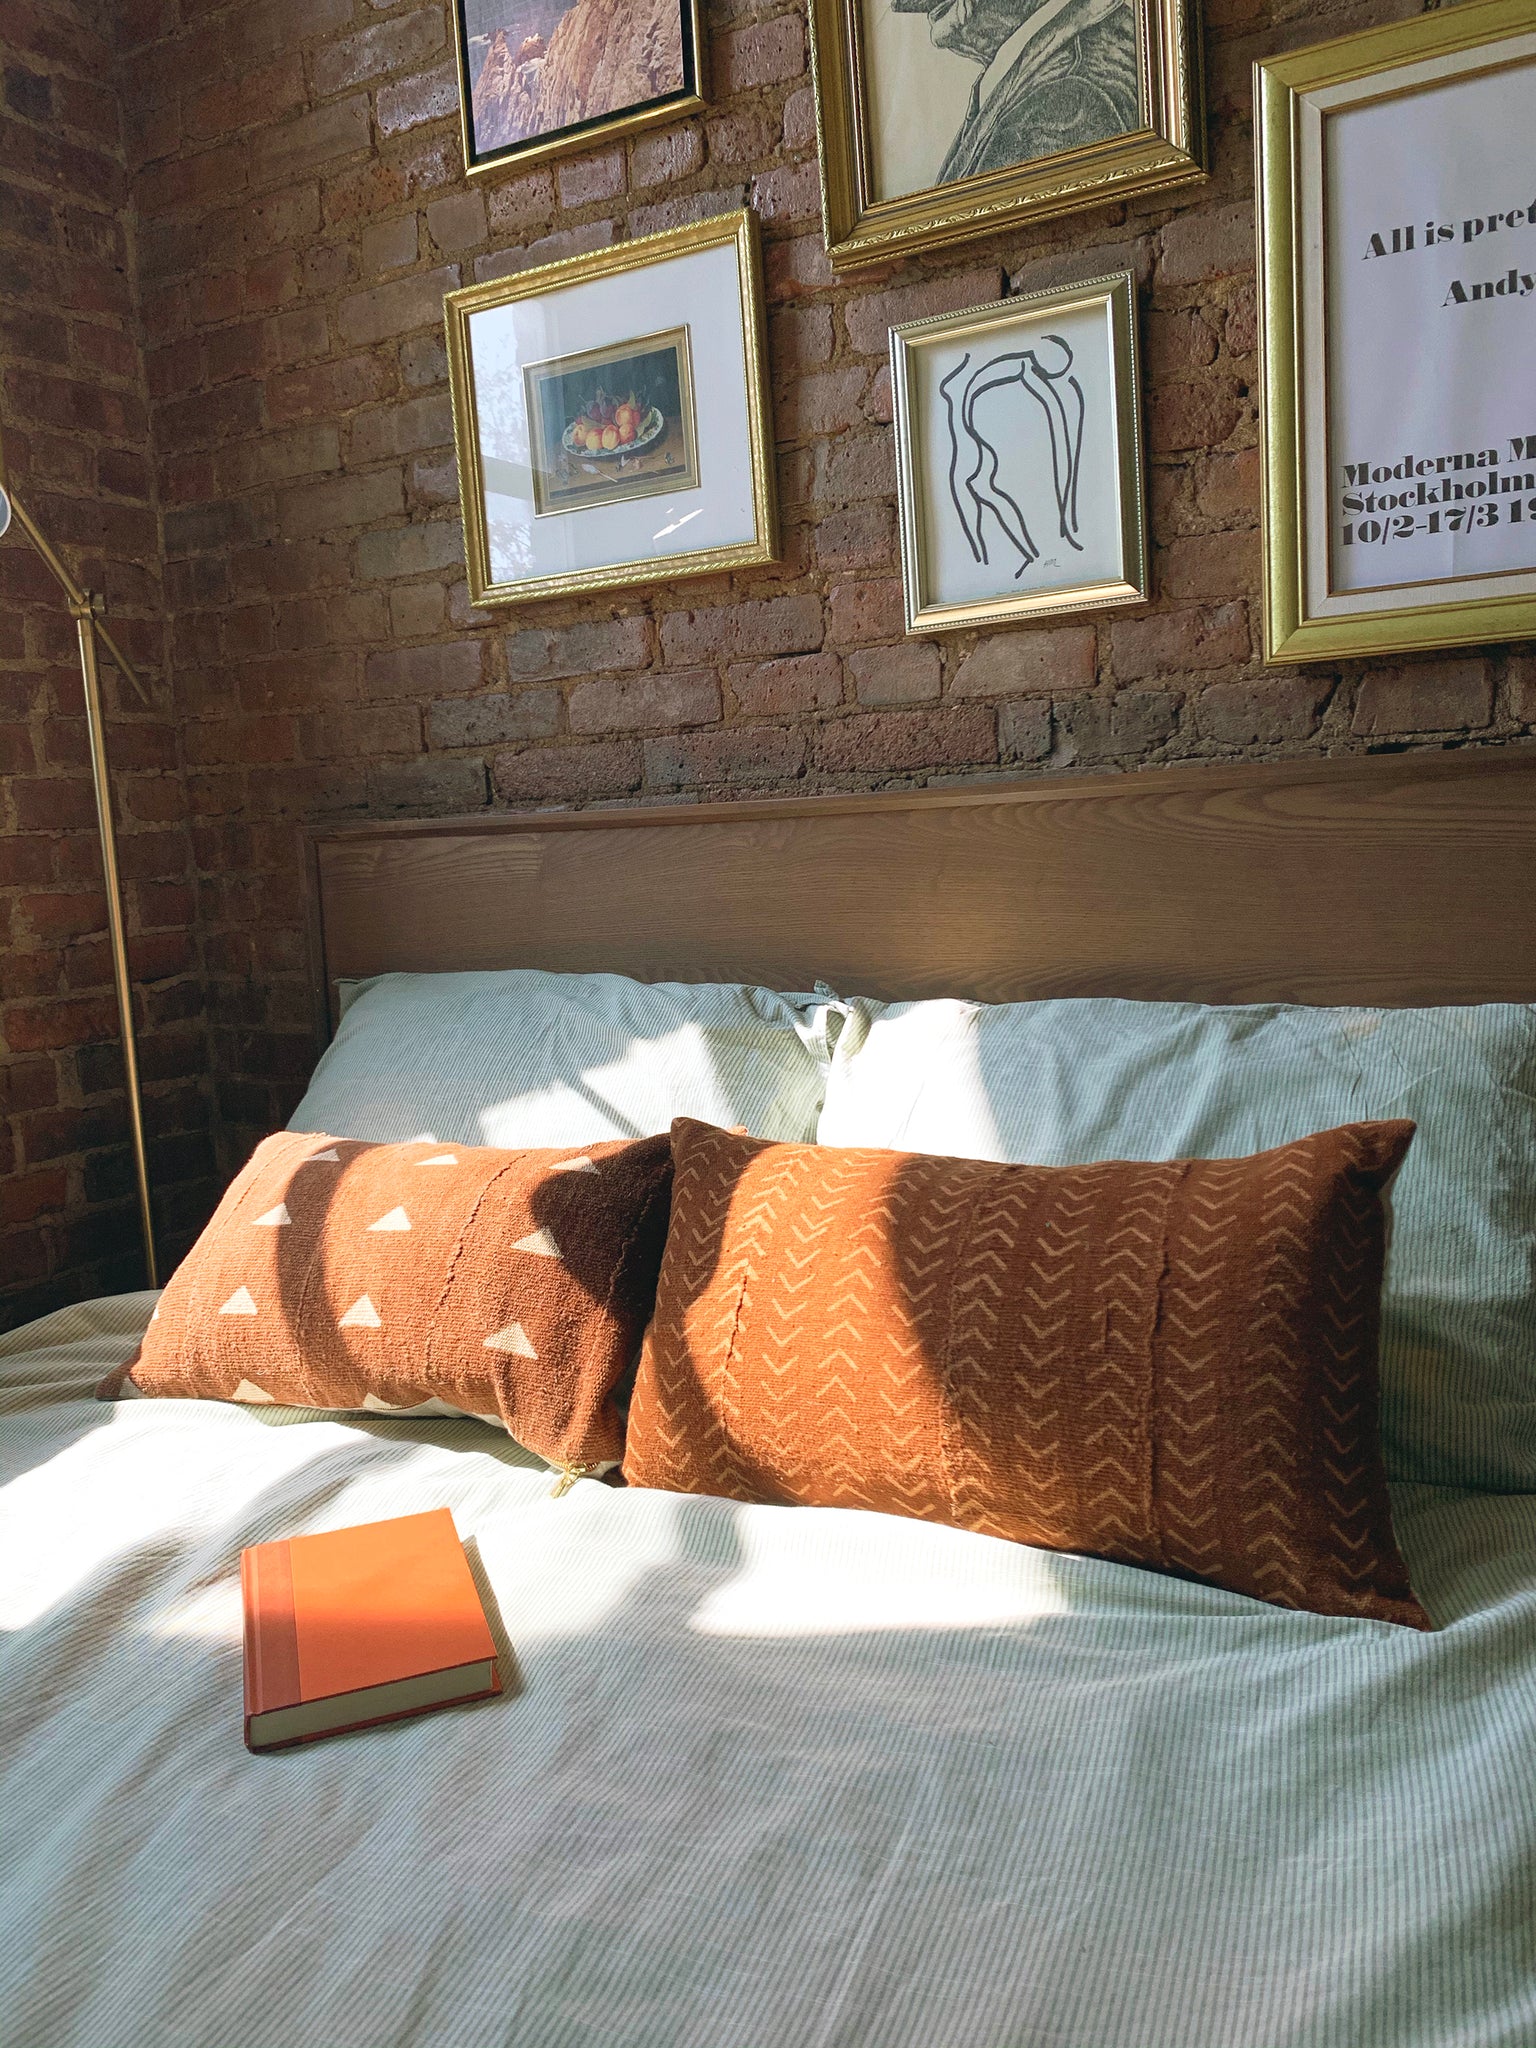 A closeup of a bed in front of a brick wall with gold picture frames. two long rust colored mud cloth pillows and an orange book on top of bed.